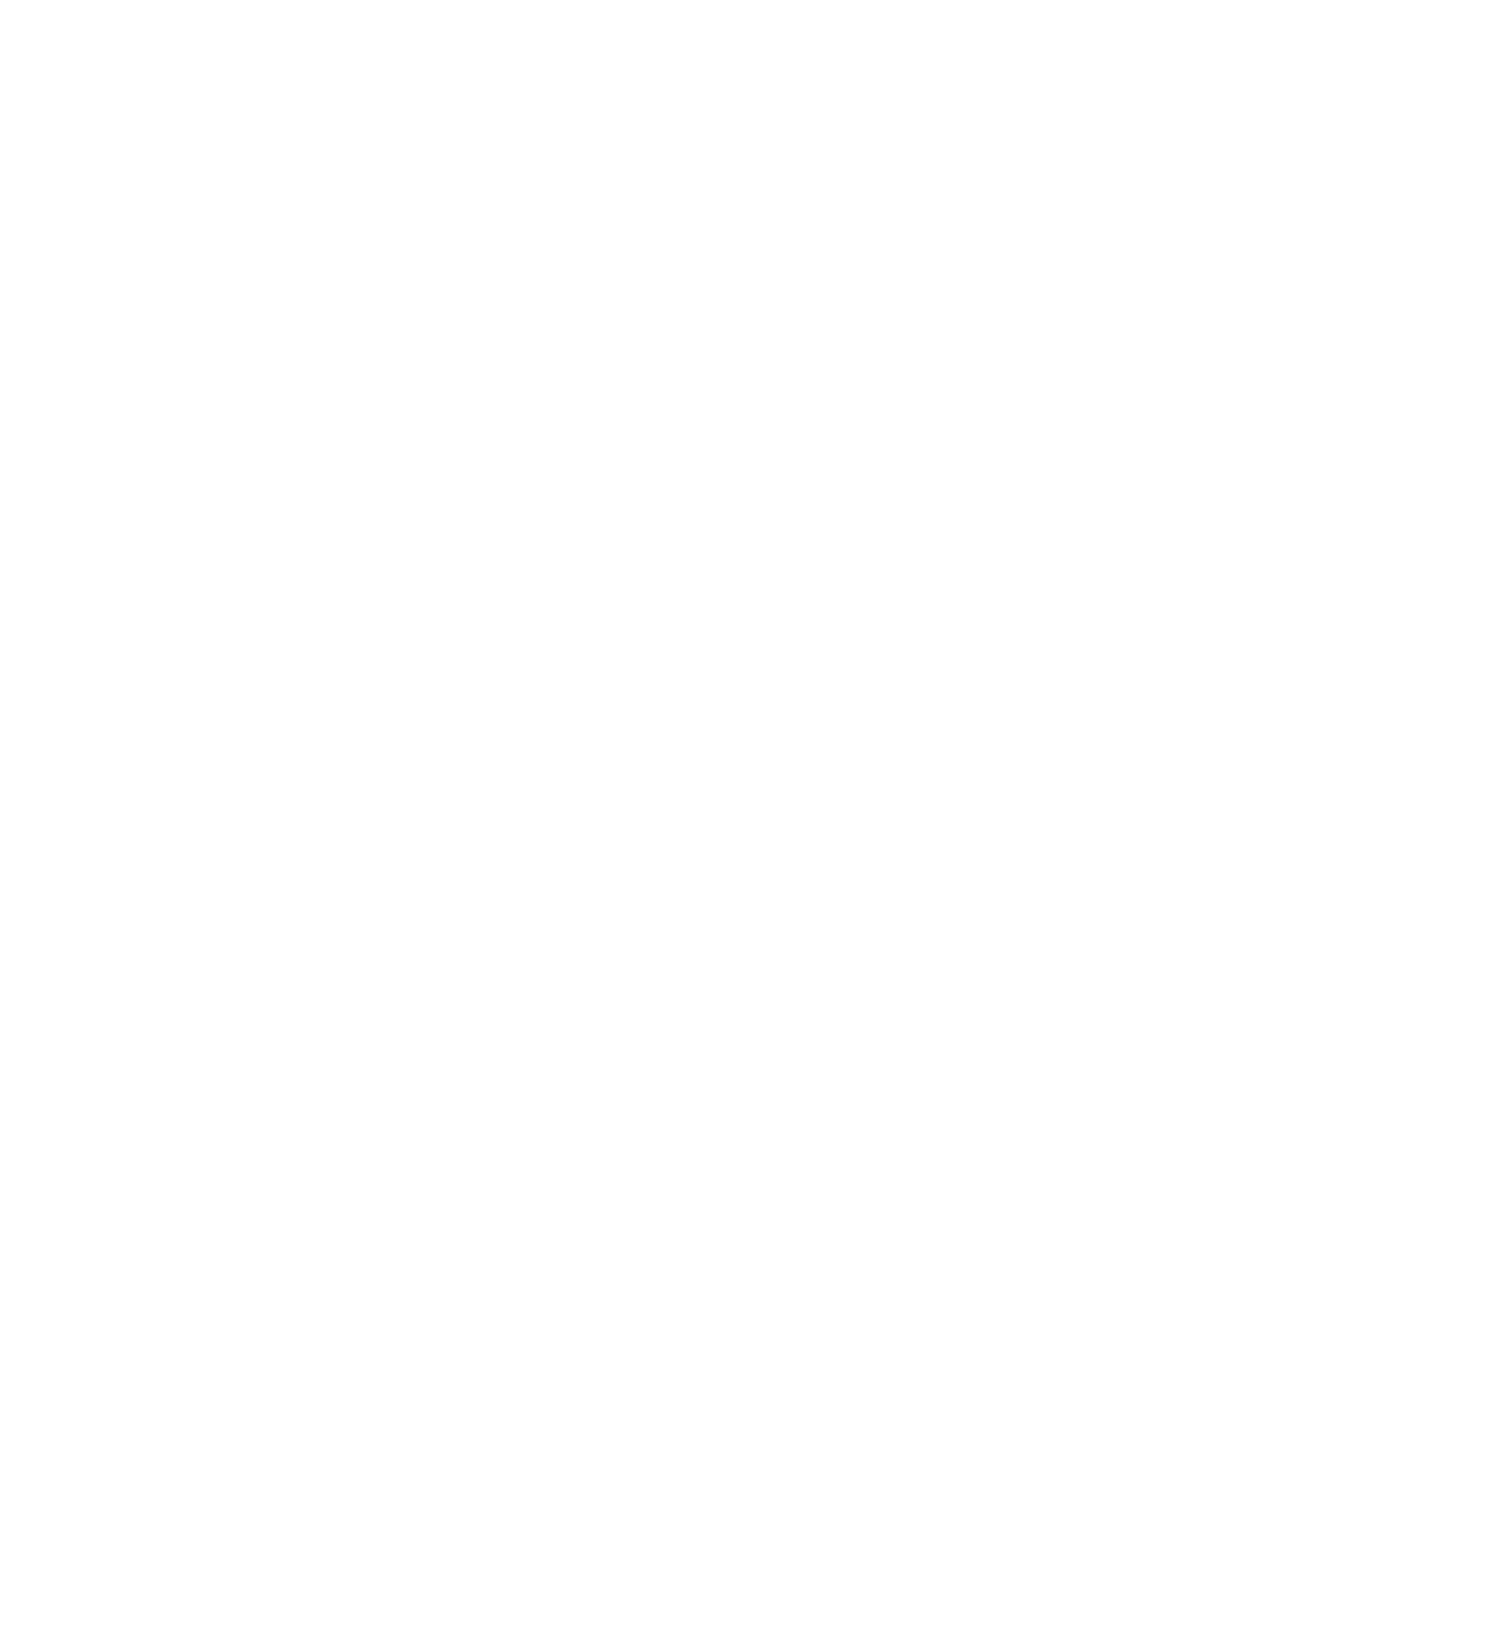 The Careers guy